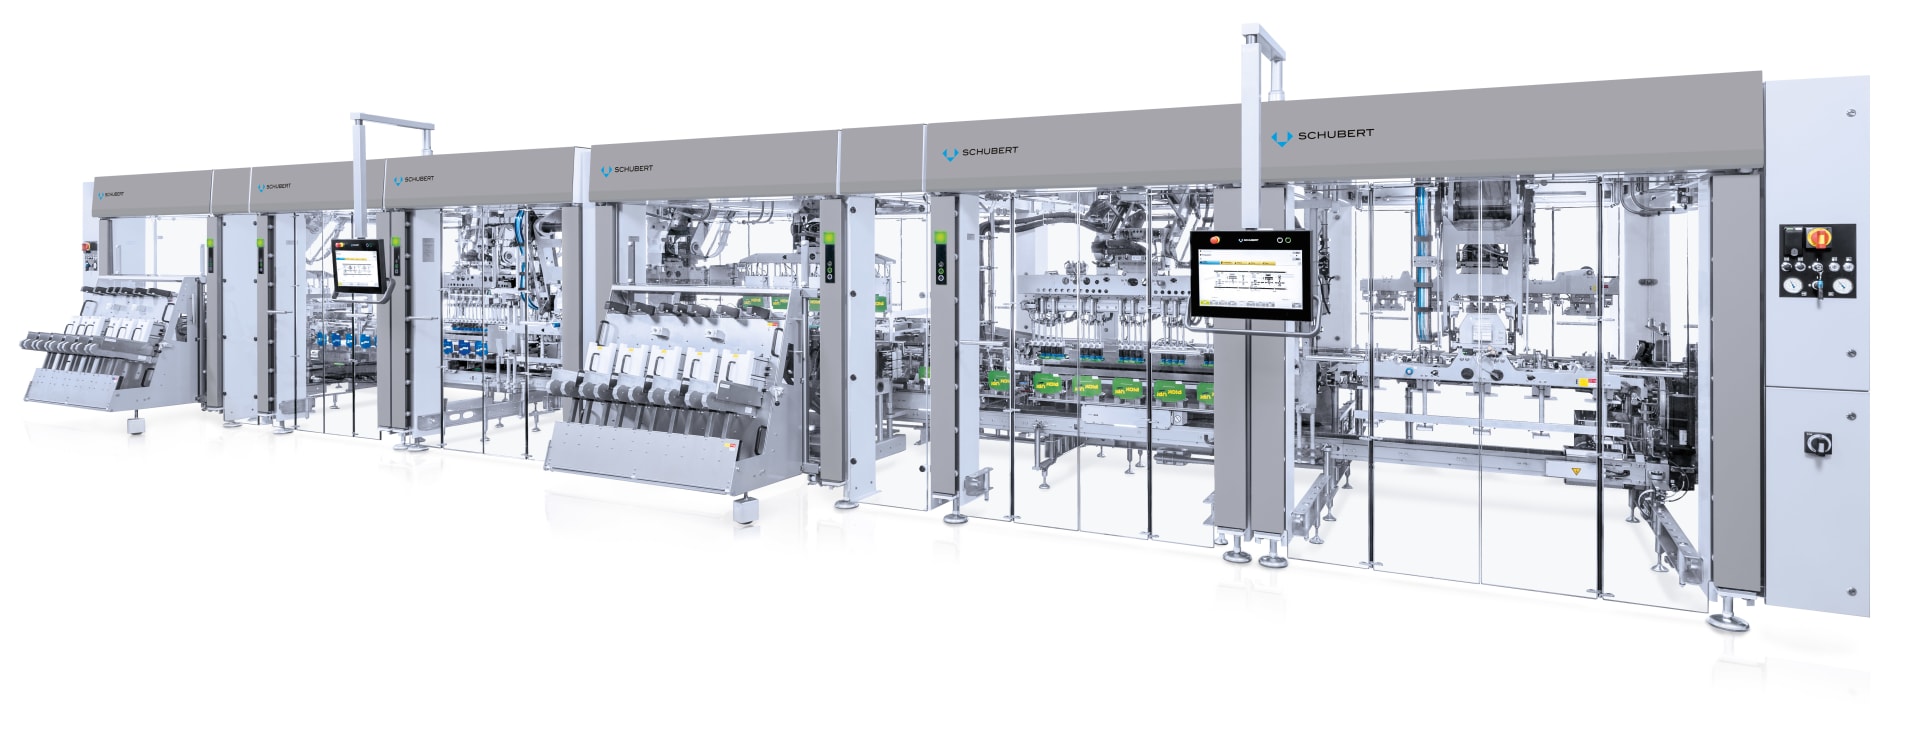 The new packaging line that Schubert developed for Bahlsen's "PiCK UP" biscuit bar.